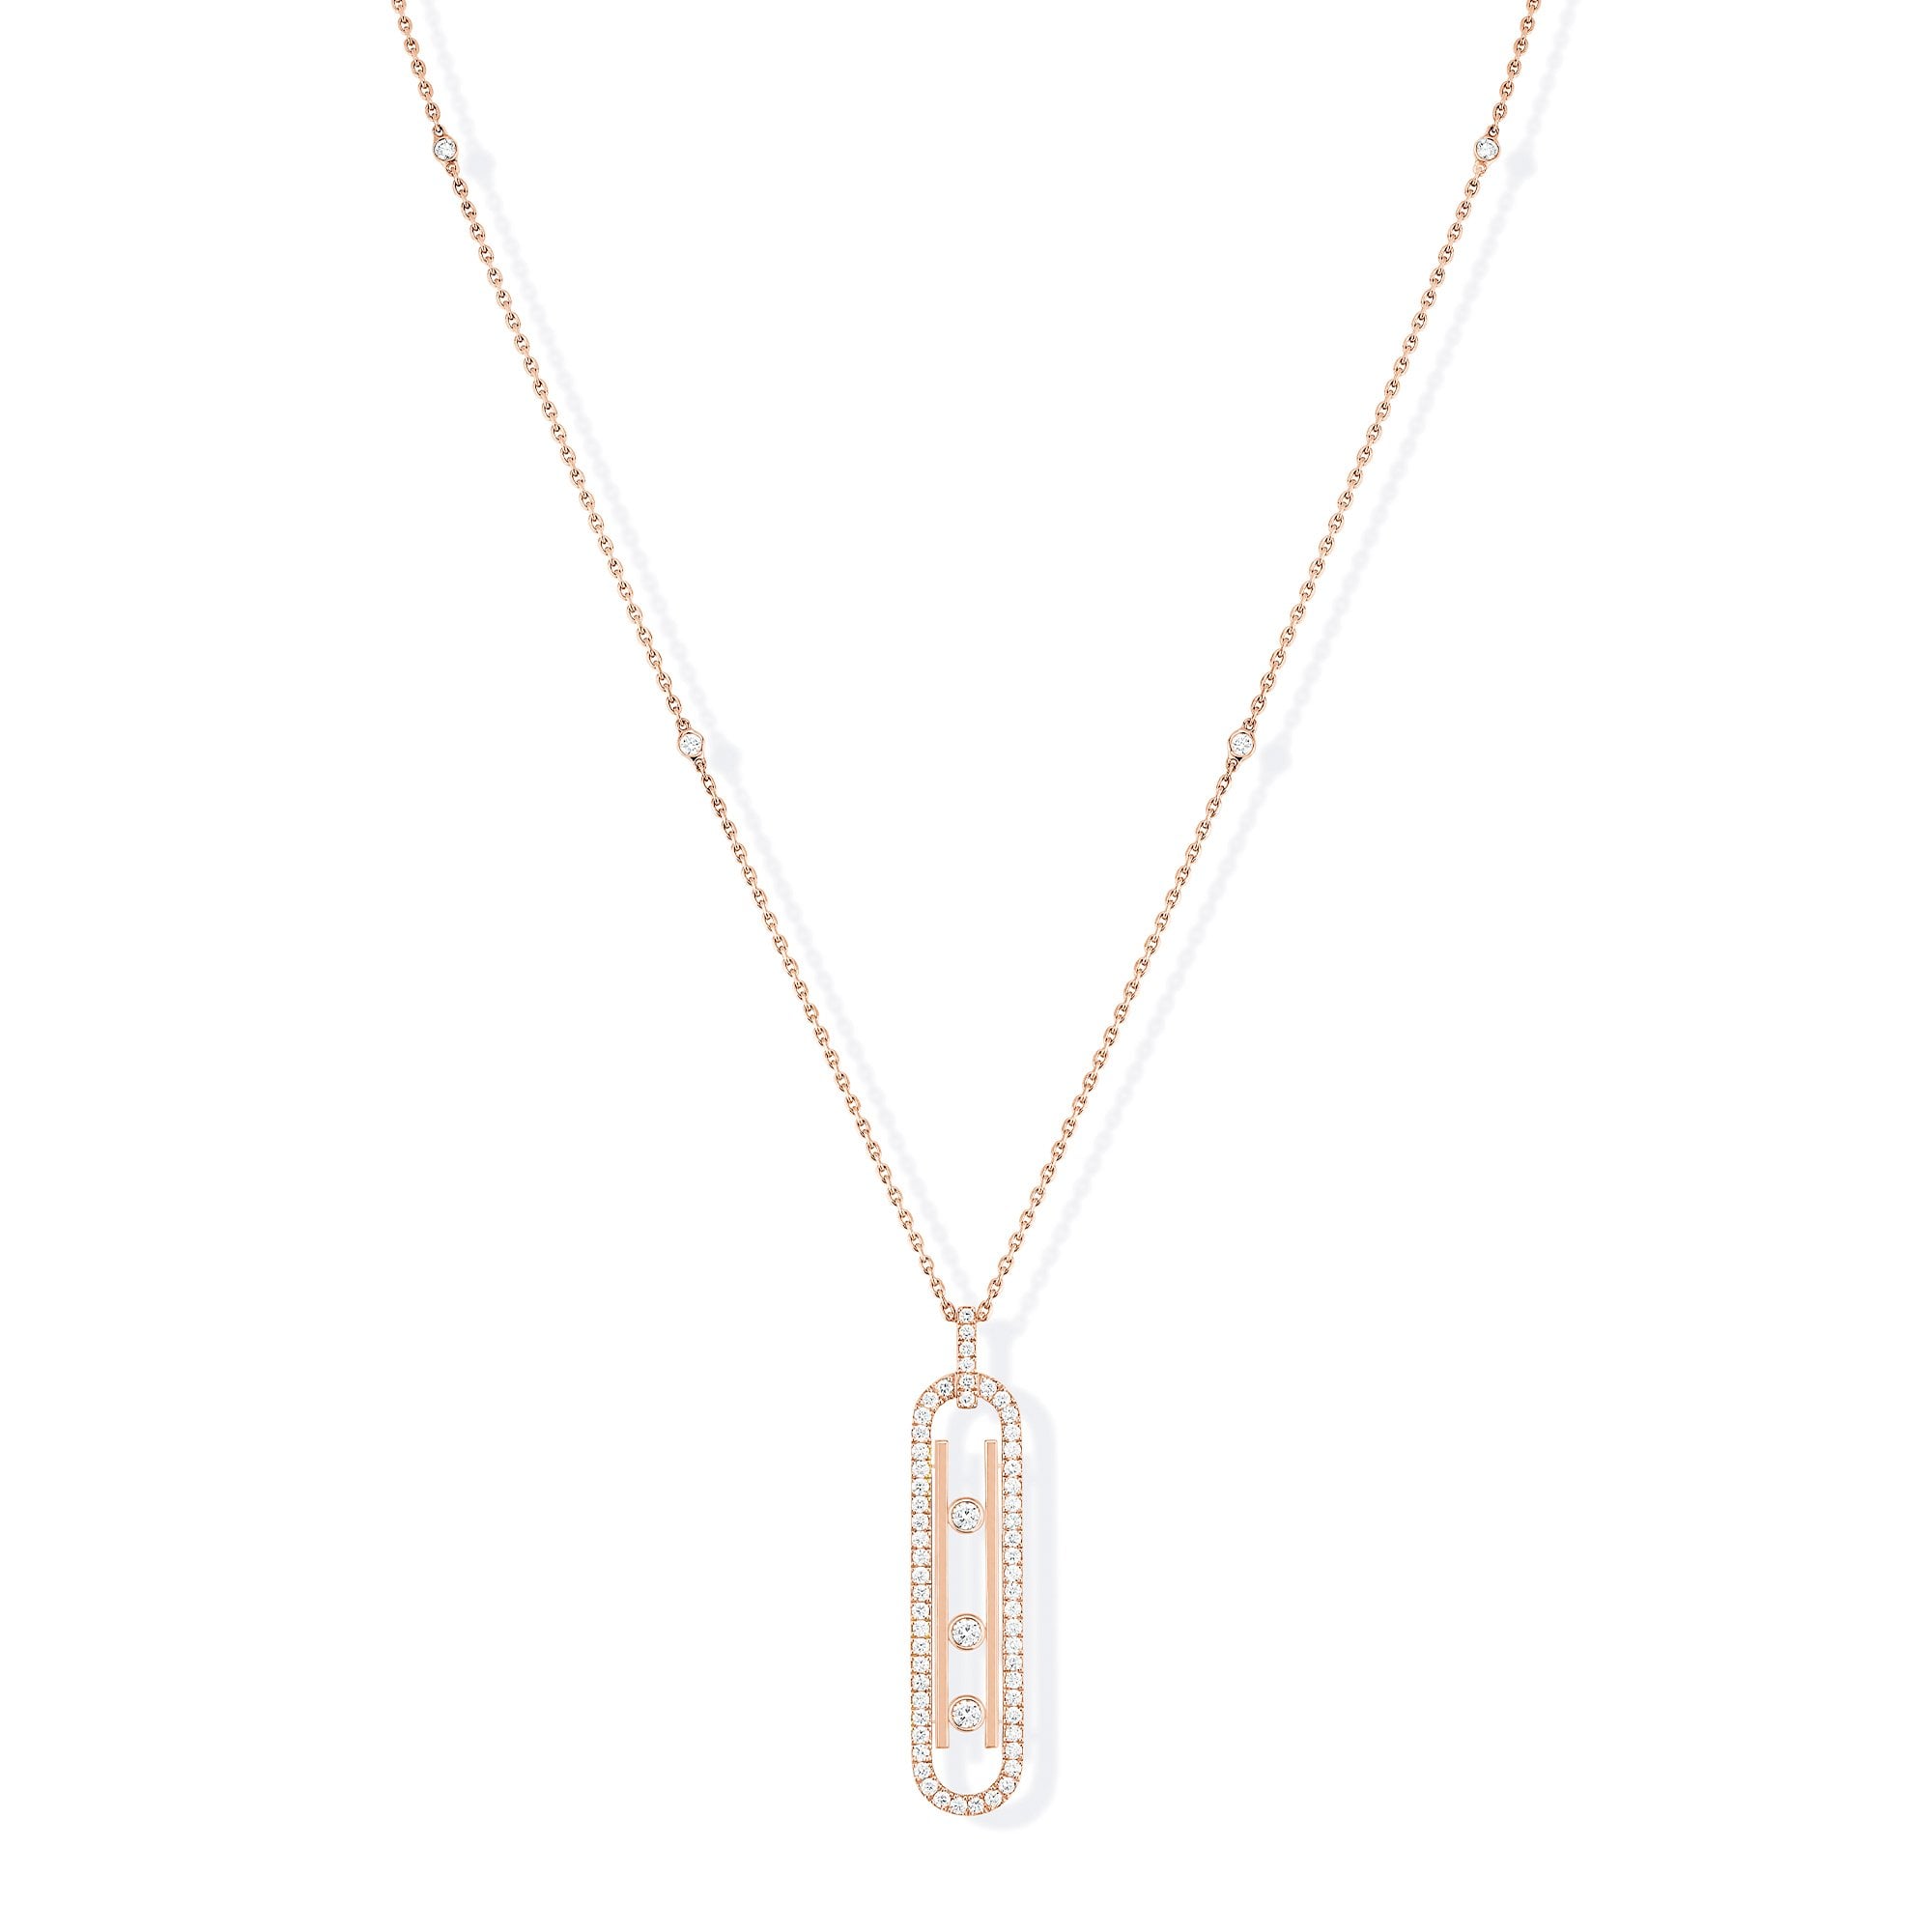 Move 10th PM 18ct pink gold diamond necklace